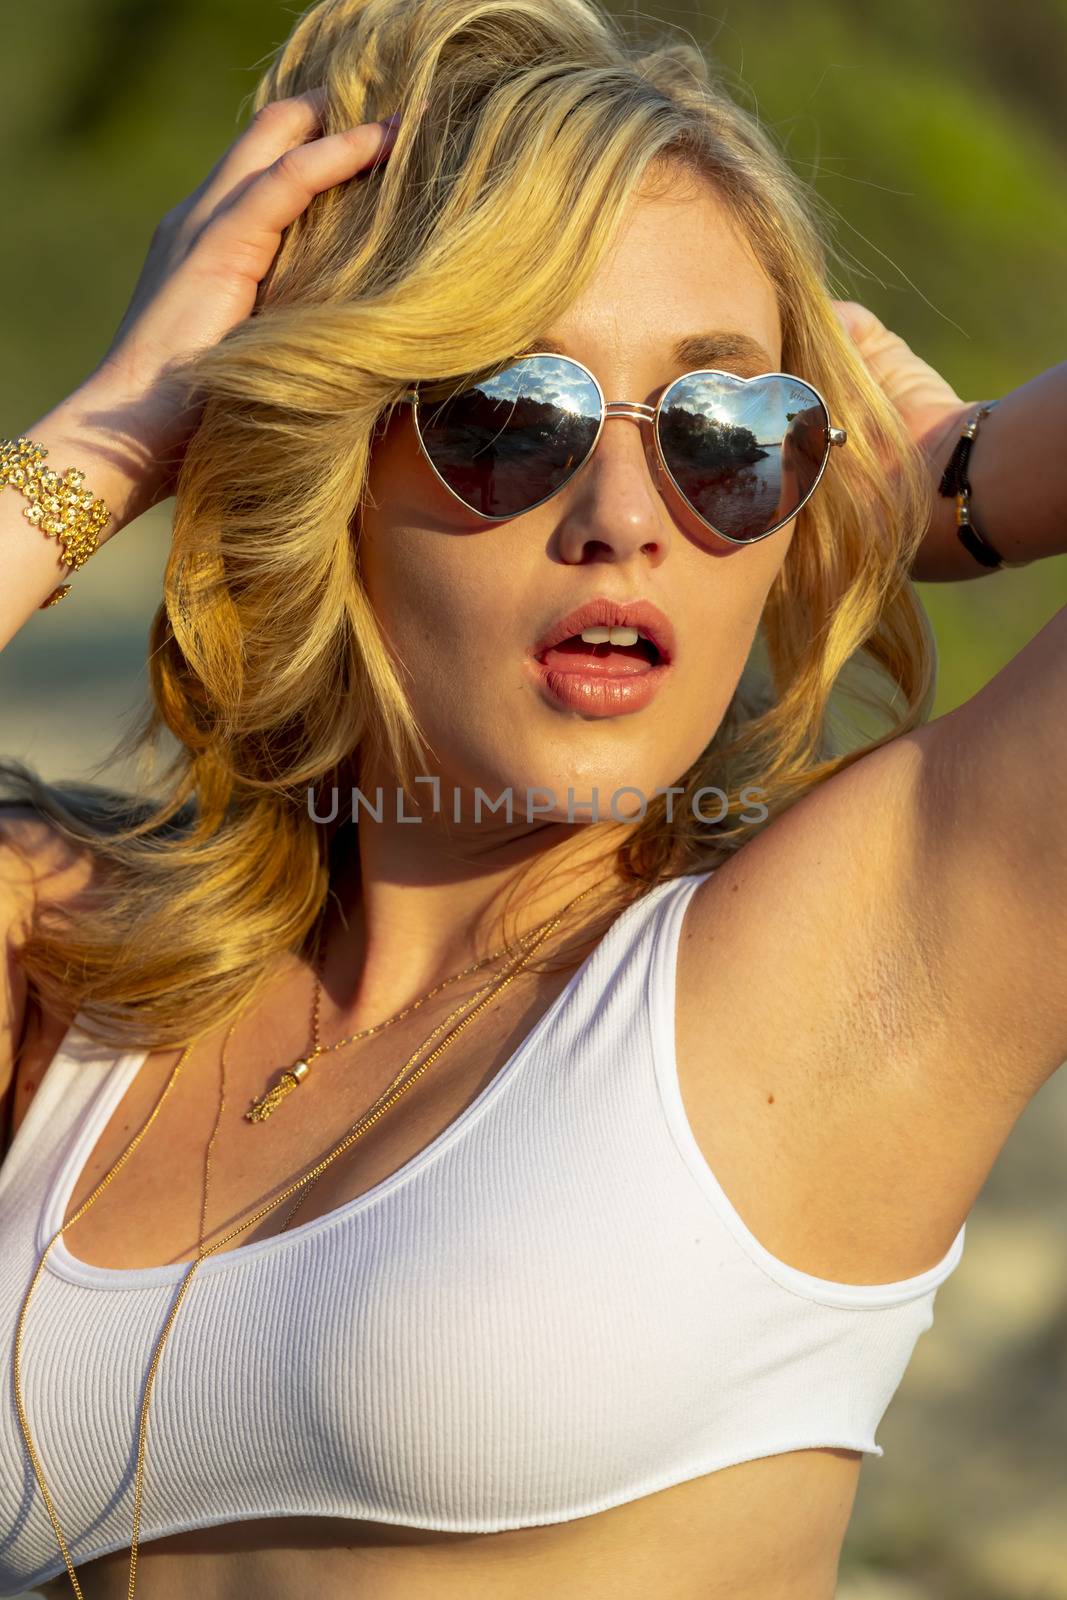 A Lovely Blonde Model Enjoys A Summers Day Outdoors At The Park by actionsports